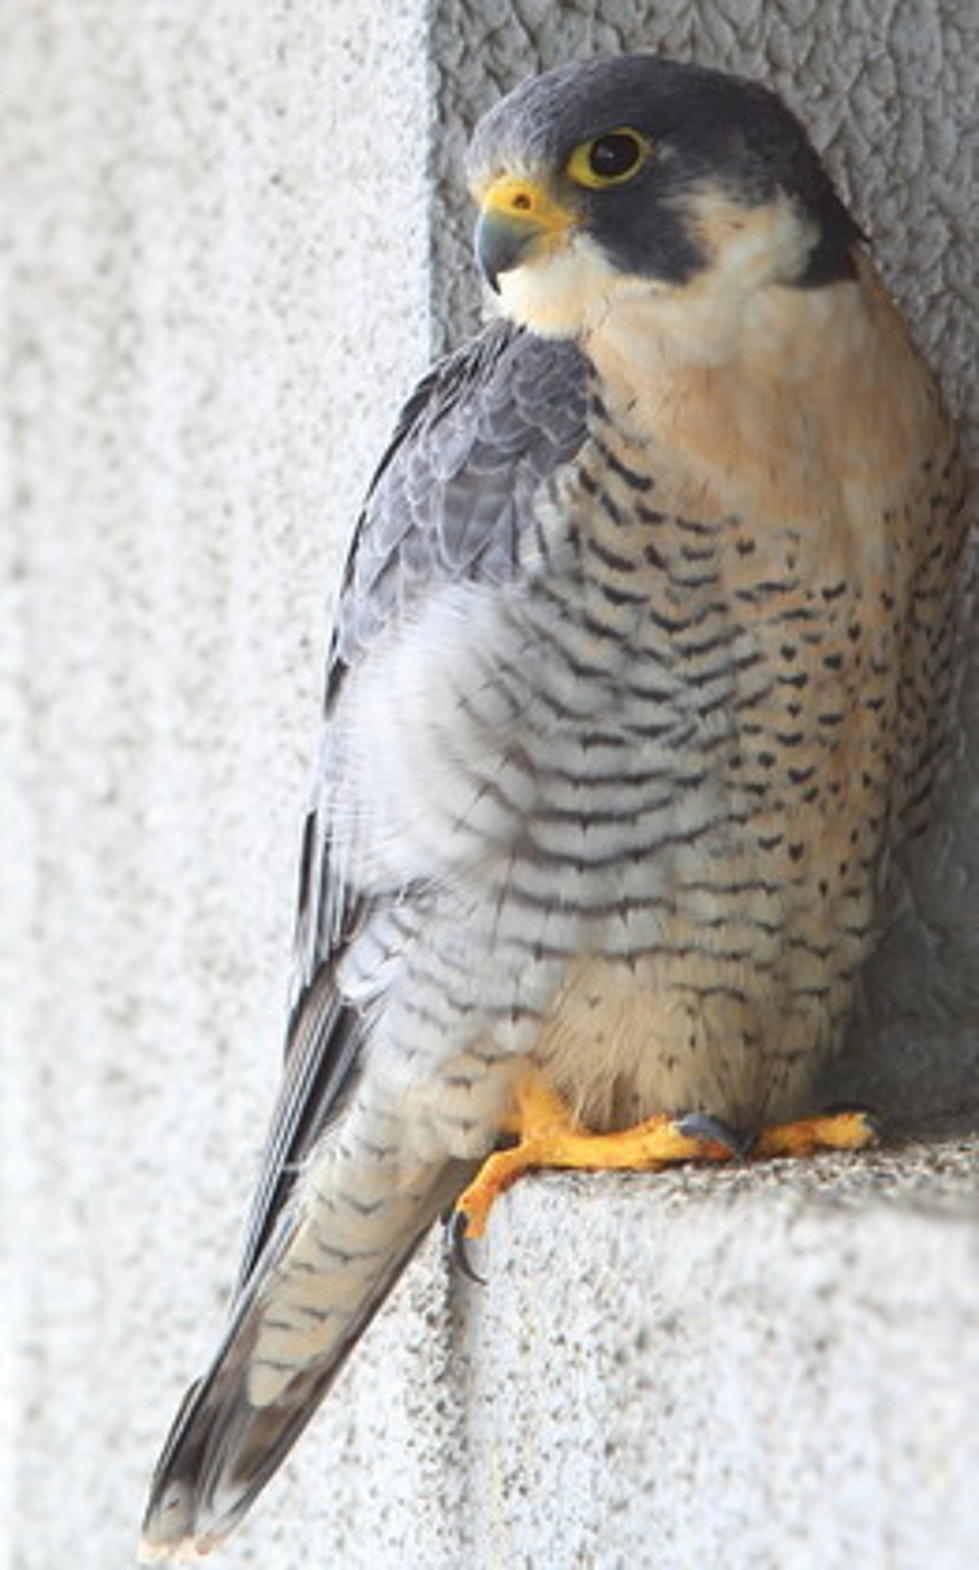 Woman Convicted after Falcon’s Death Denied New Trial